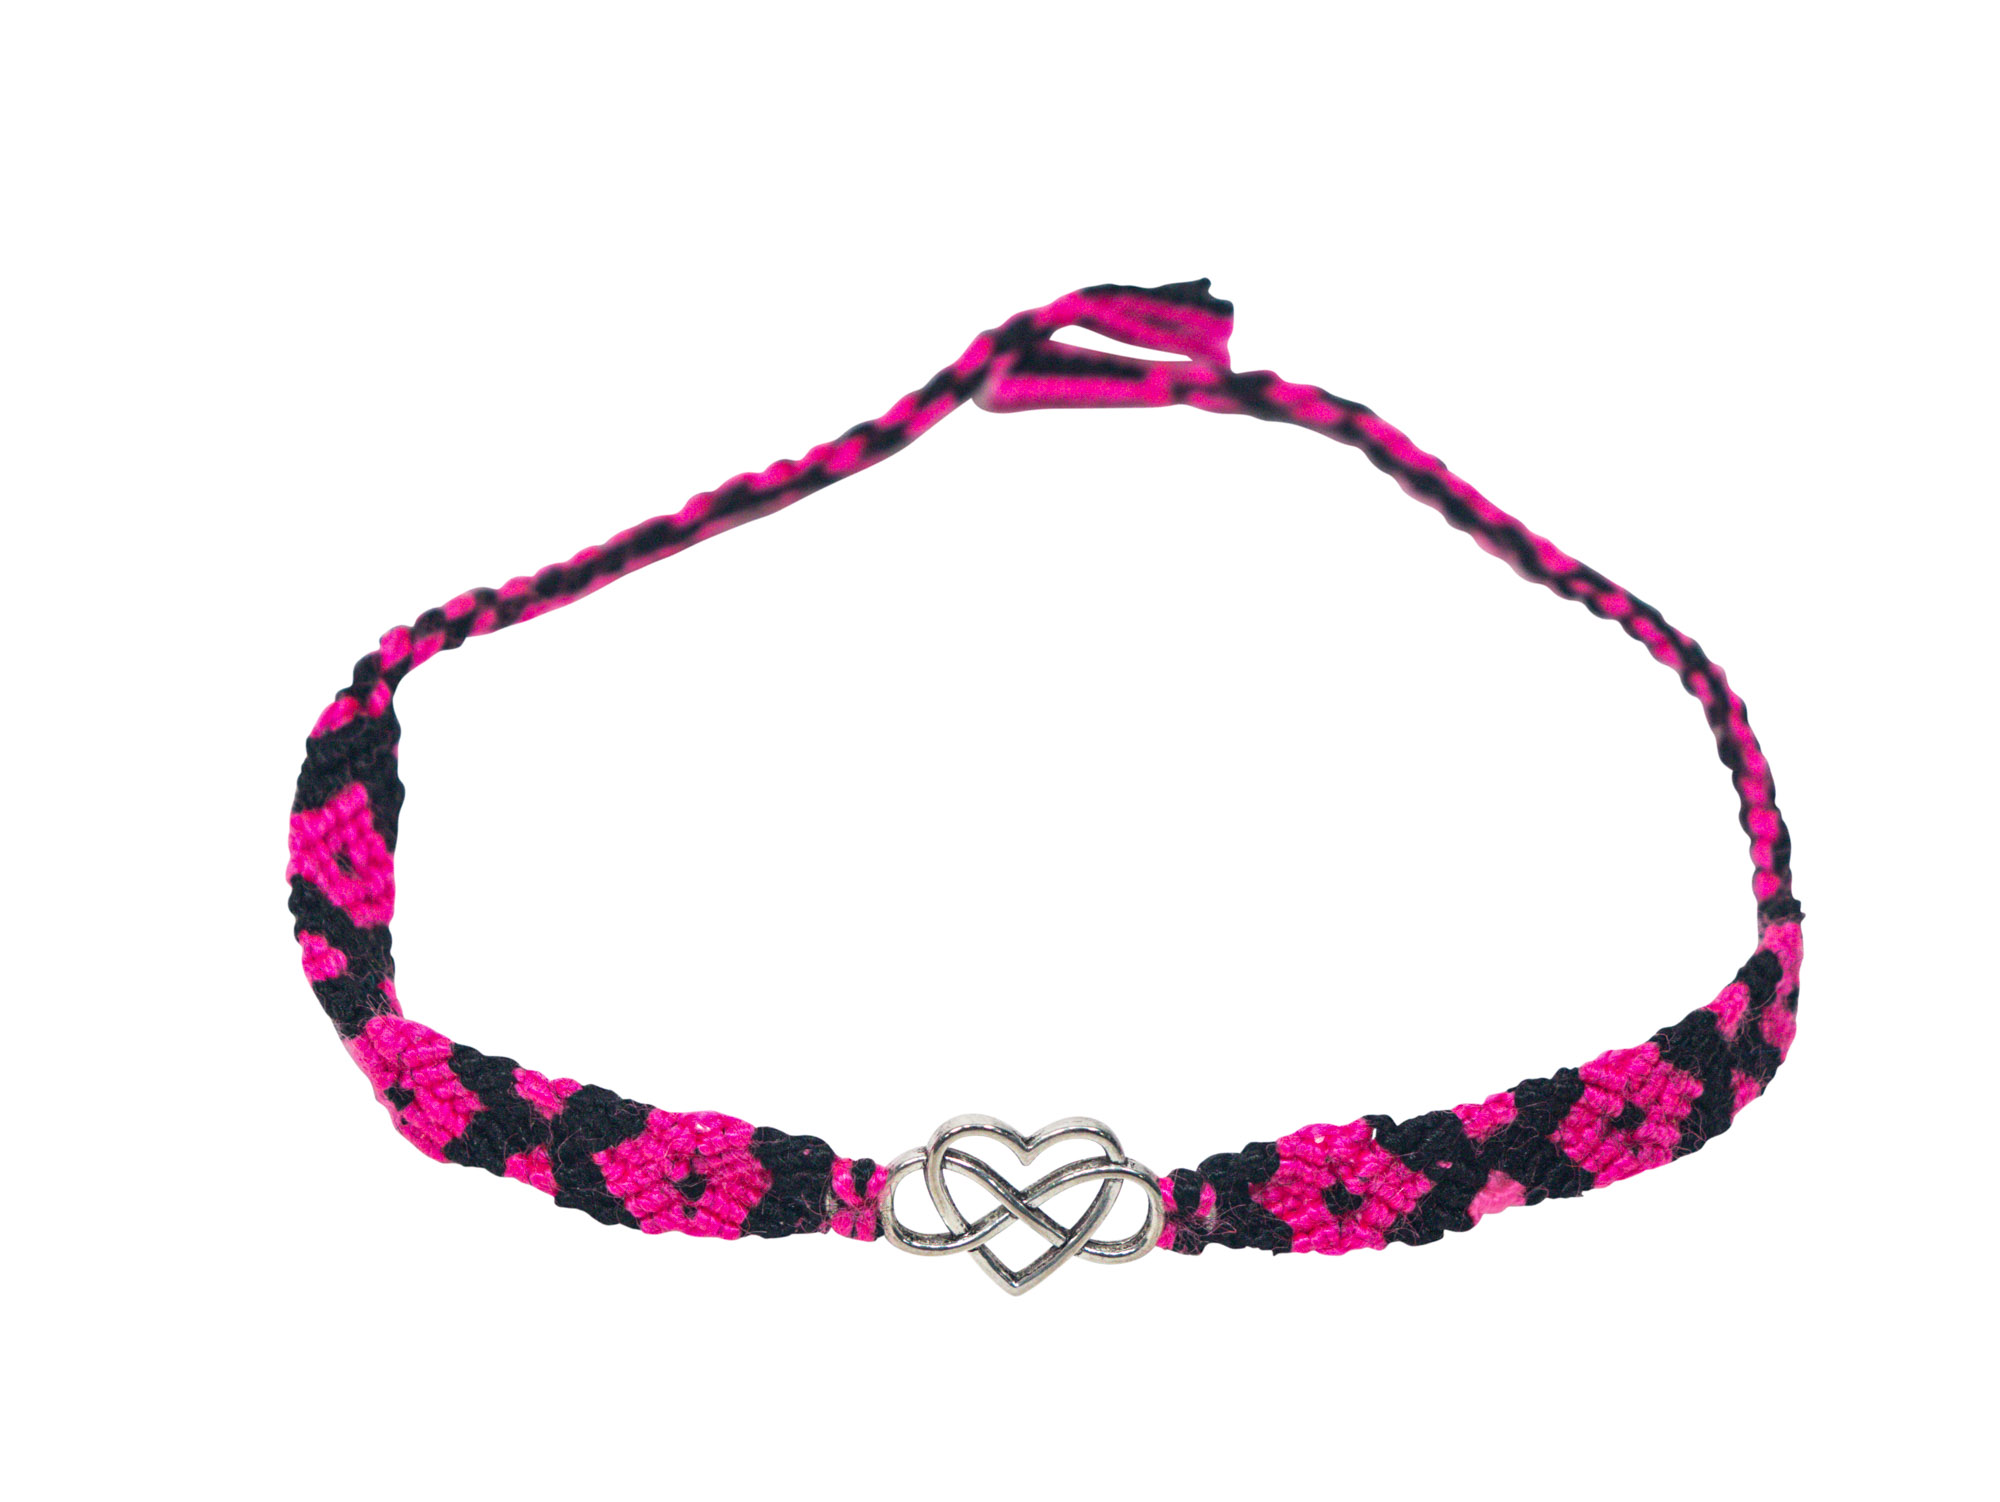 Buy Thin Heart Friendship Bracelet/anklet in Pink, Purple, or Red Online in  India - Etsy